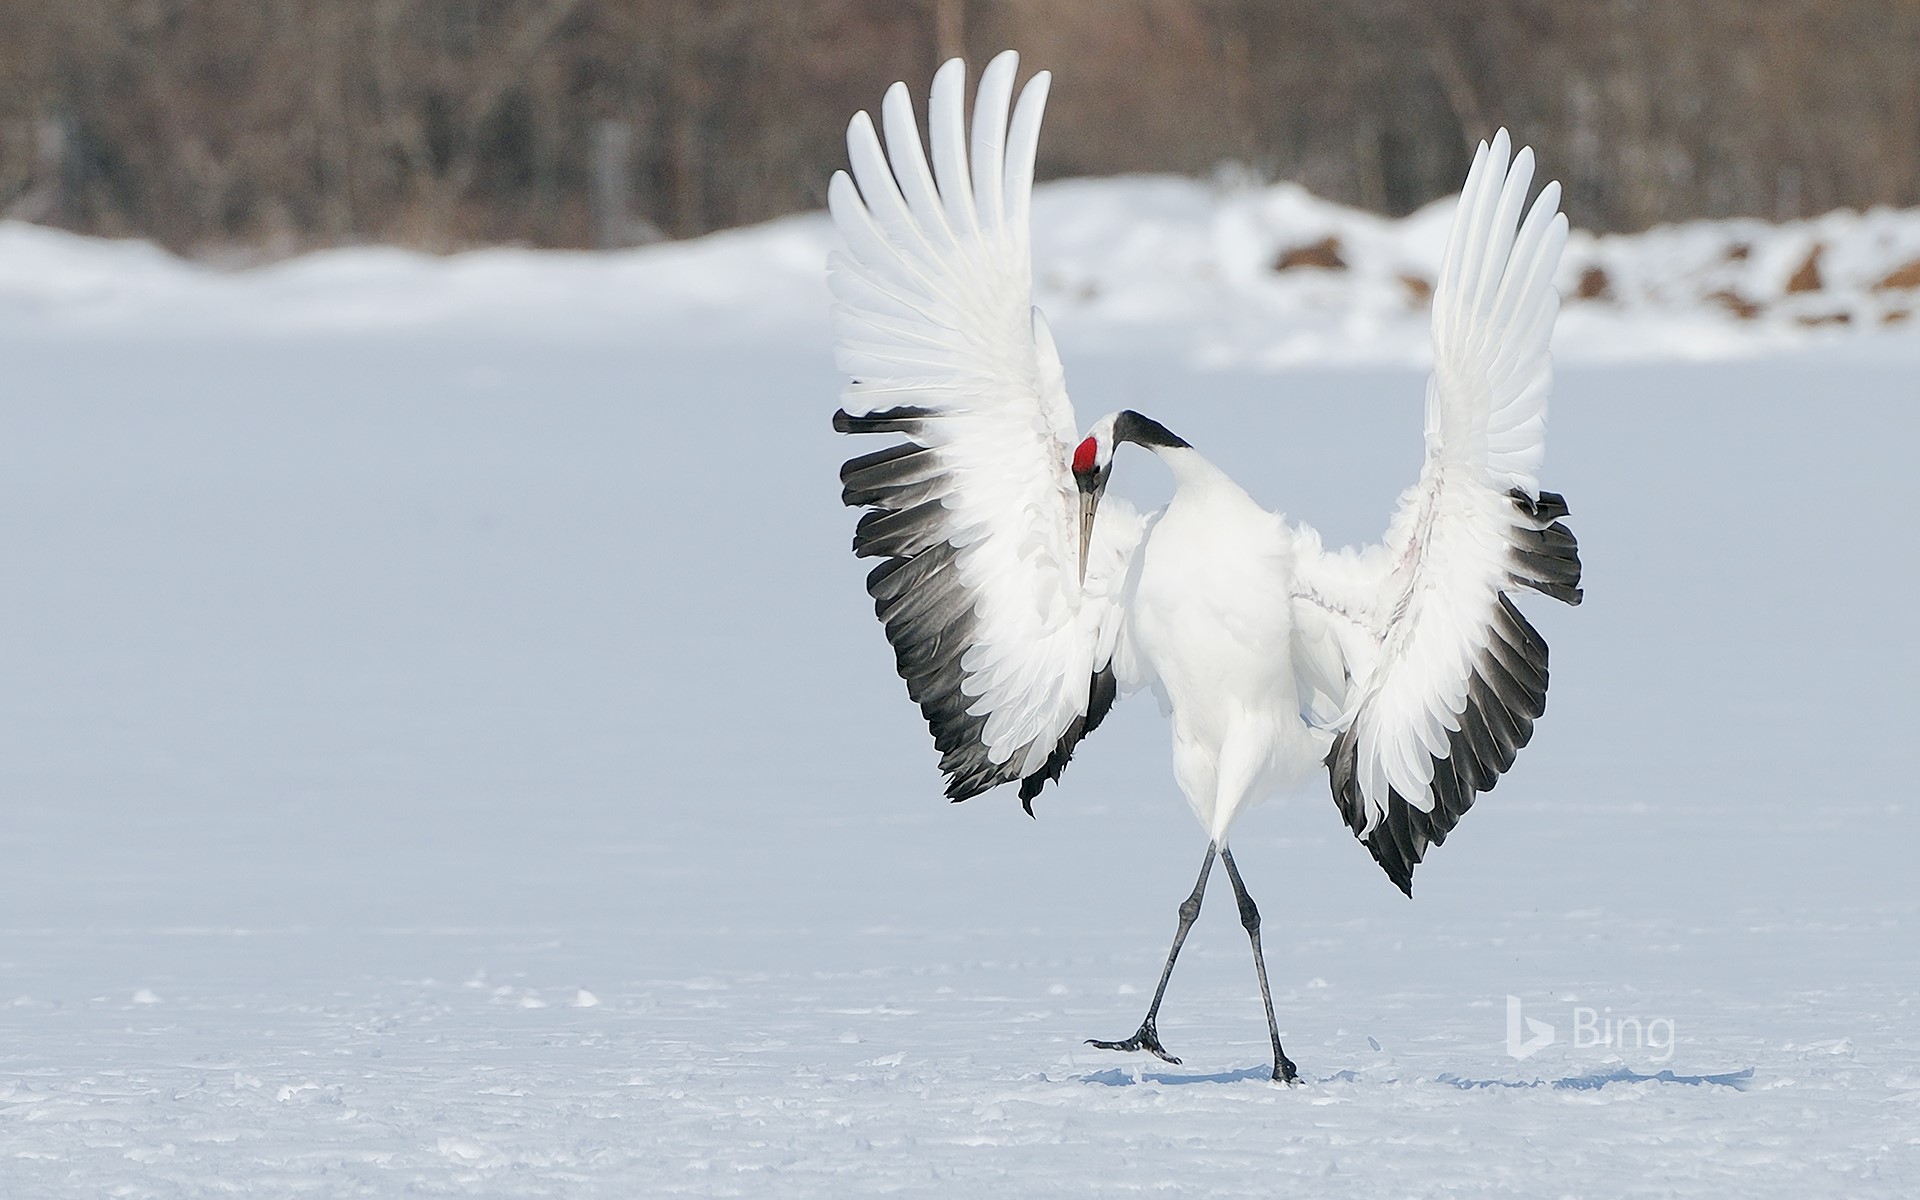 "One" Red-crowned Crane